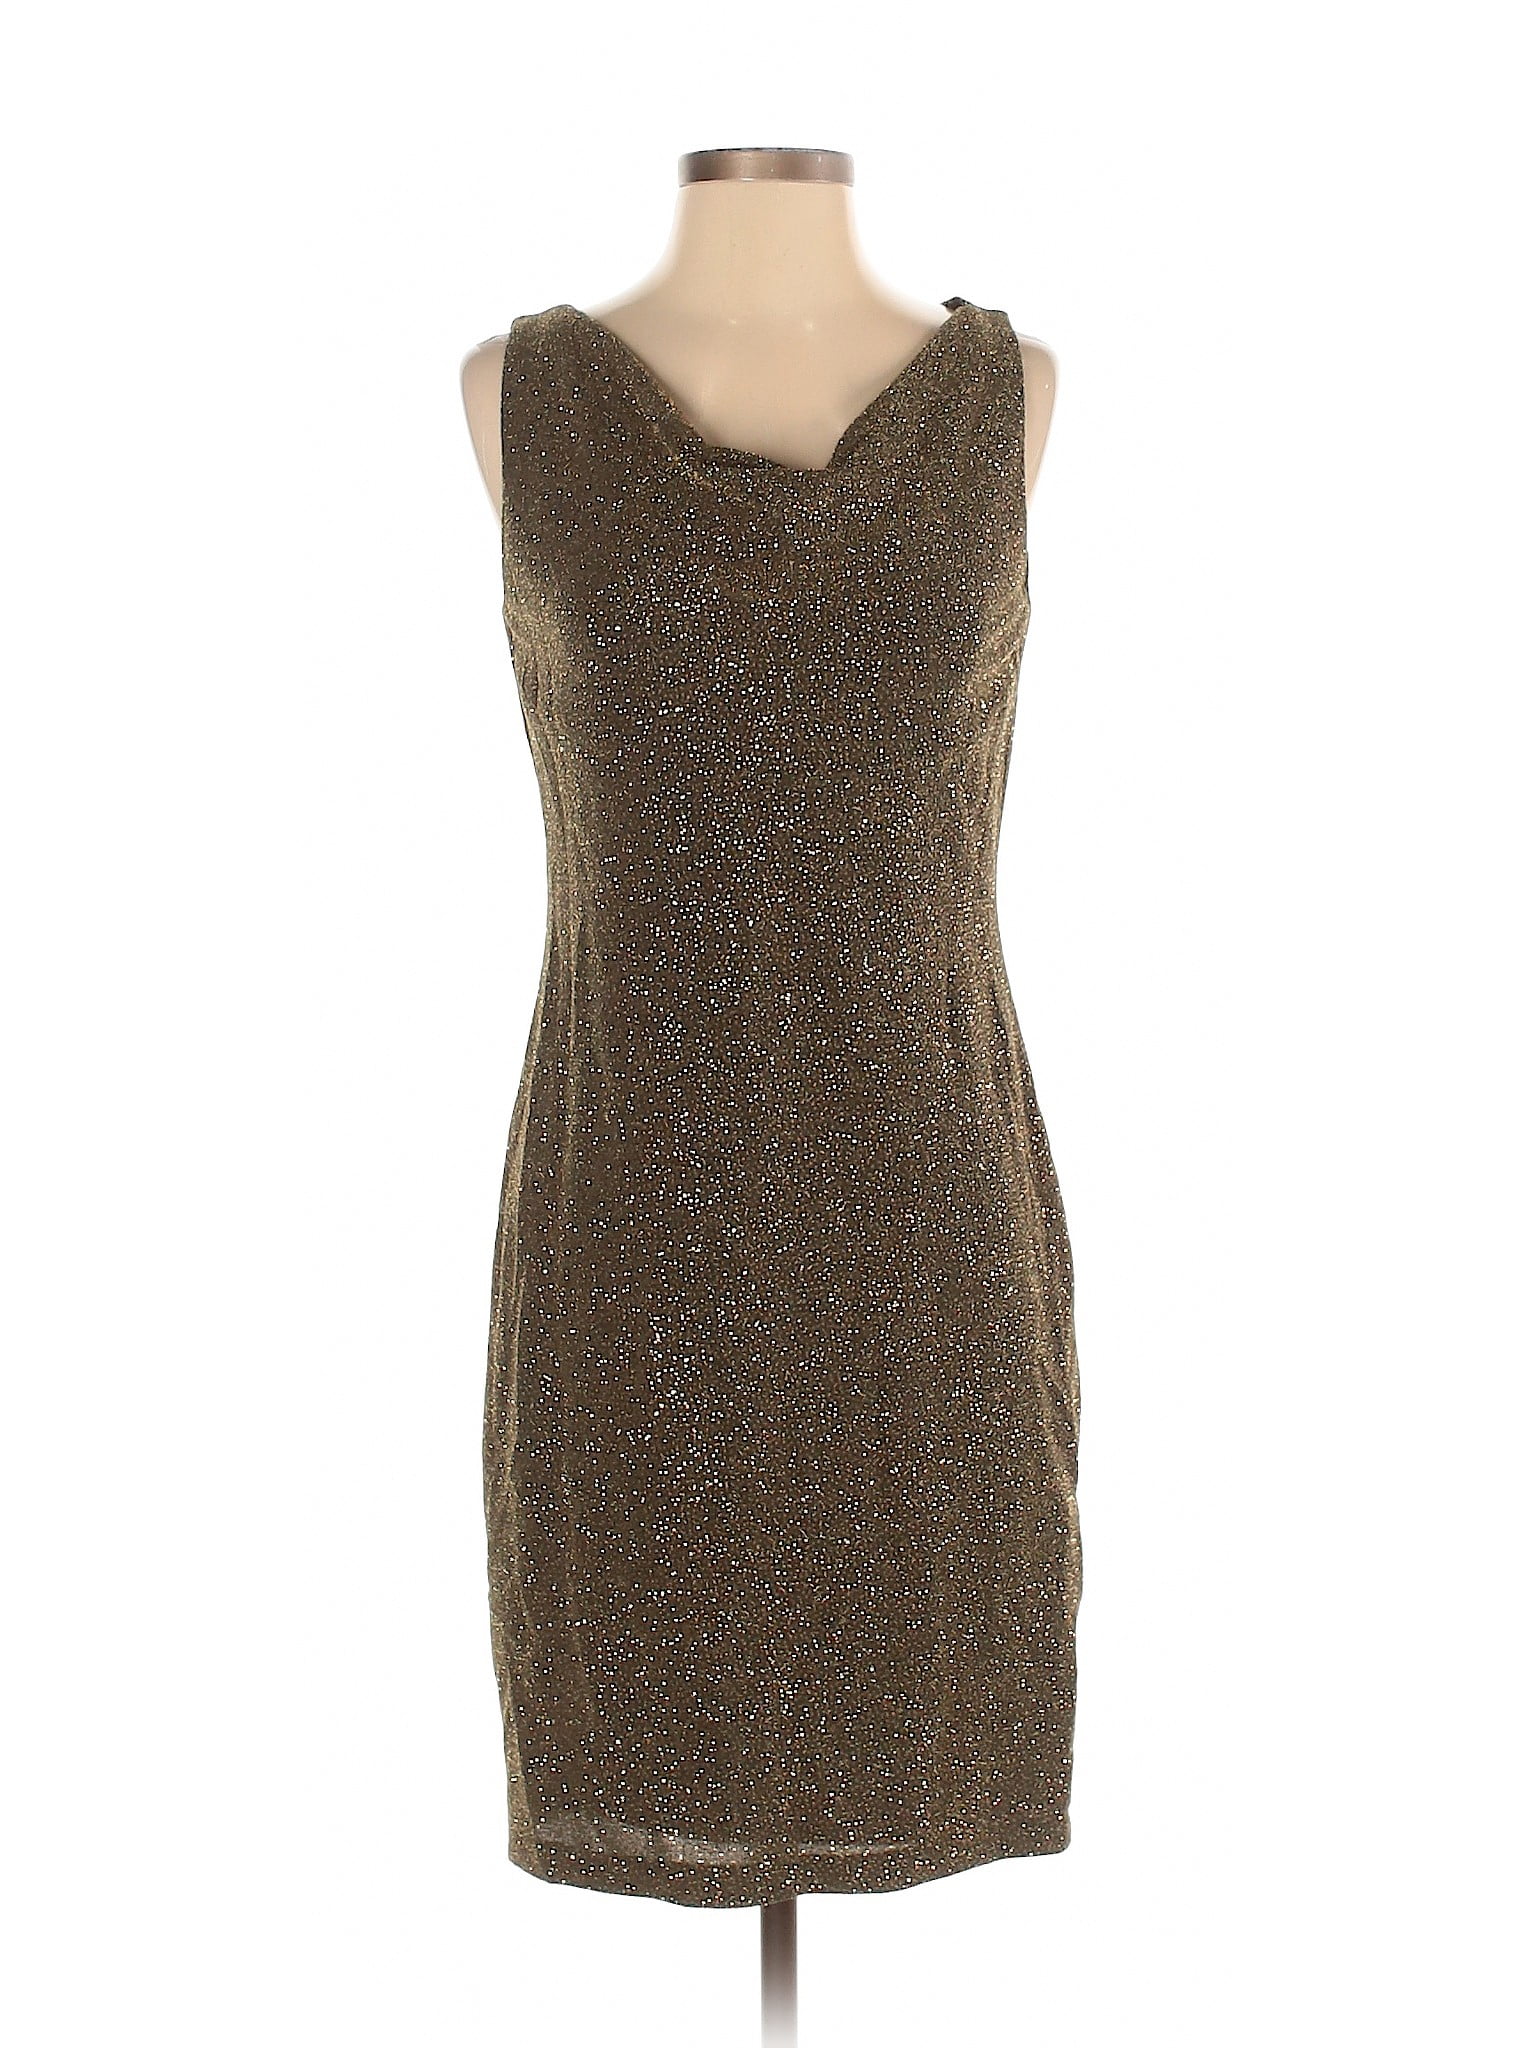 Donna Ricco - Pre-Owned Donna Ricco Women's Size 4 Cocktail Dress ...